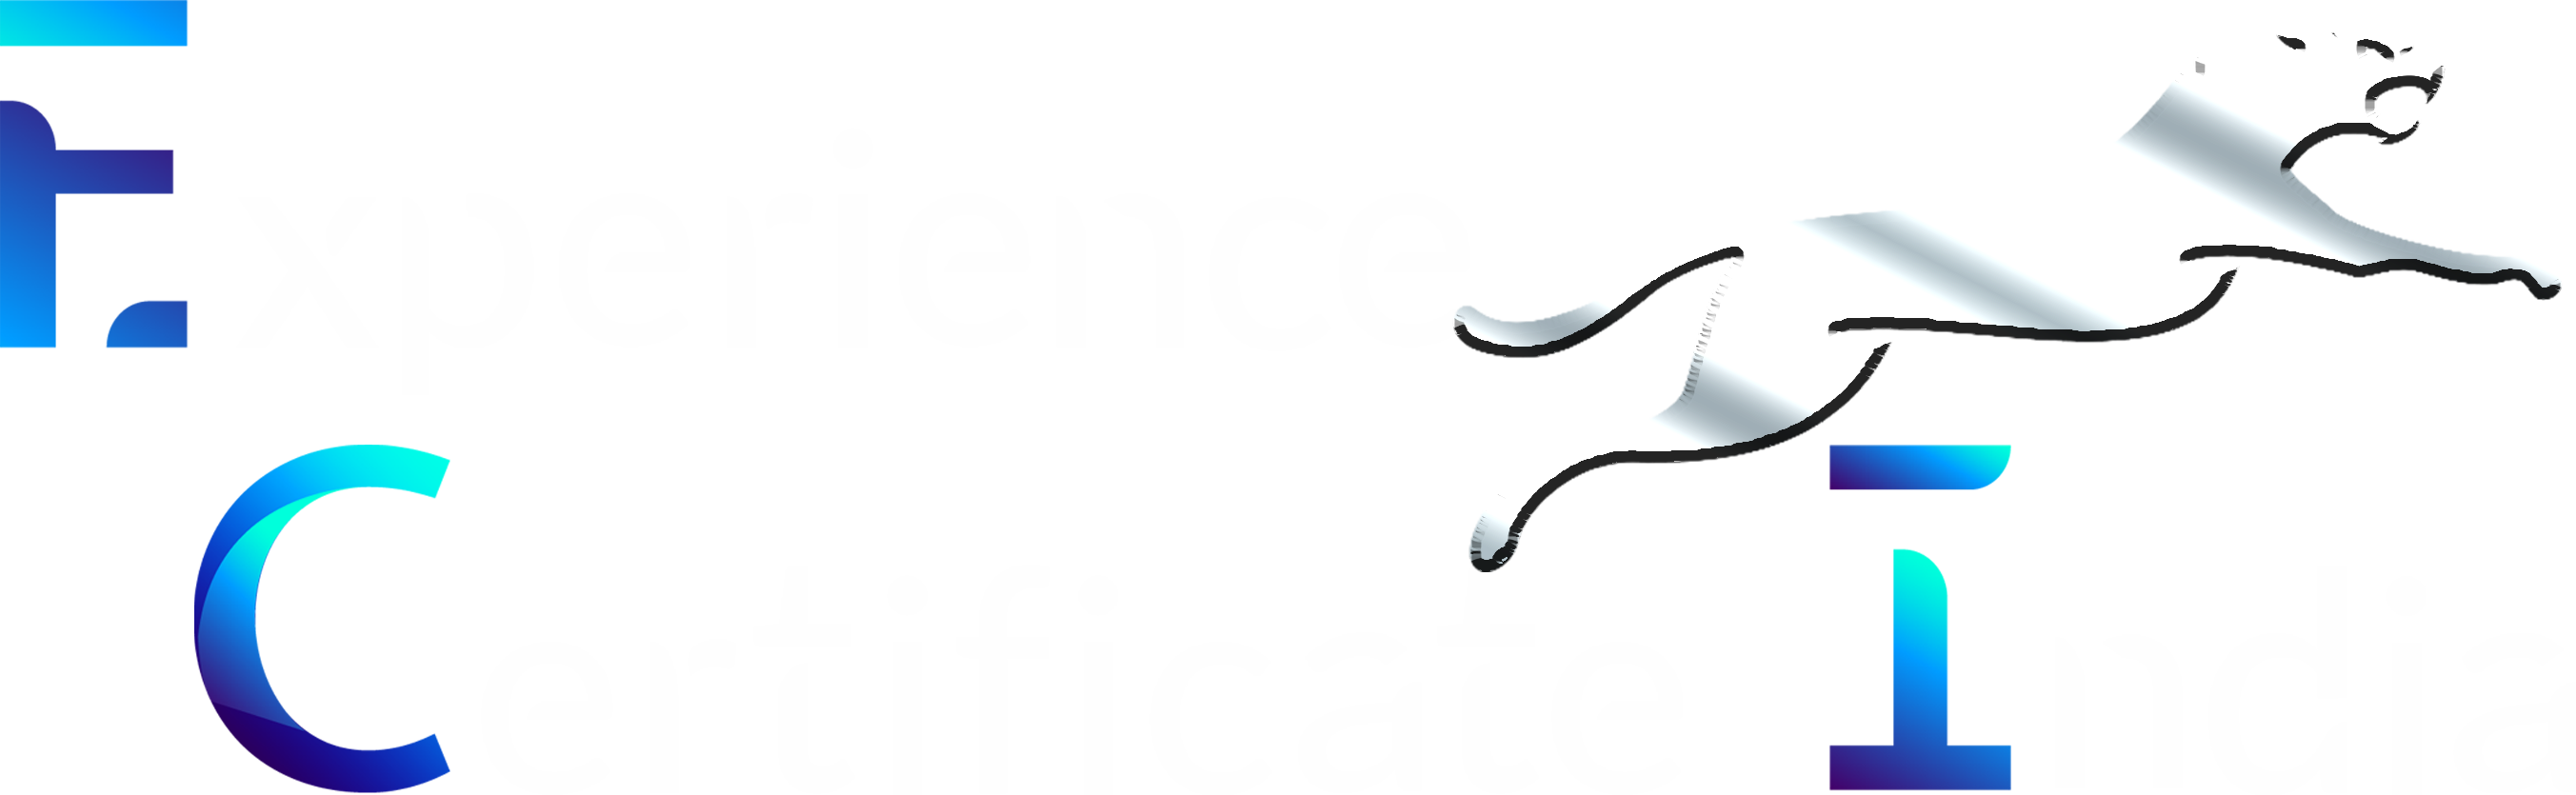 Experience certificate India